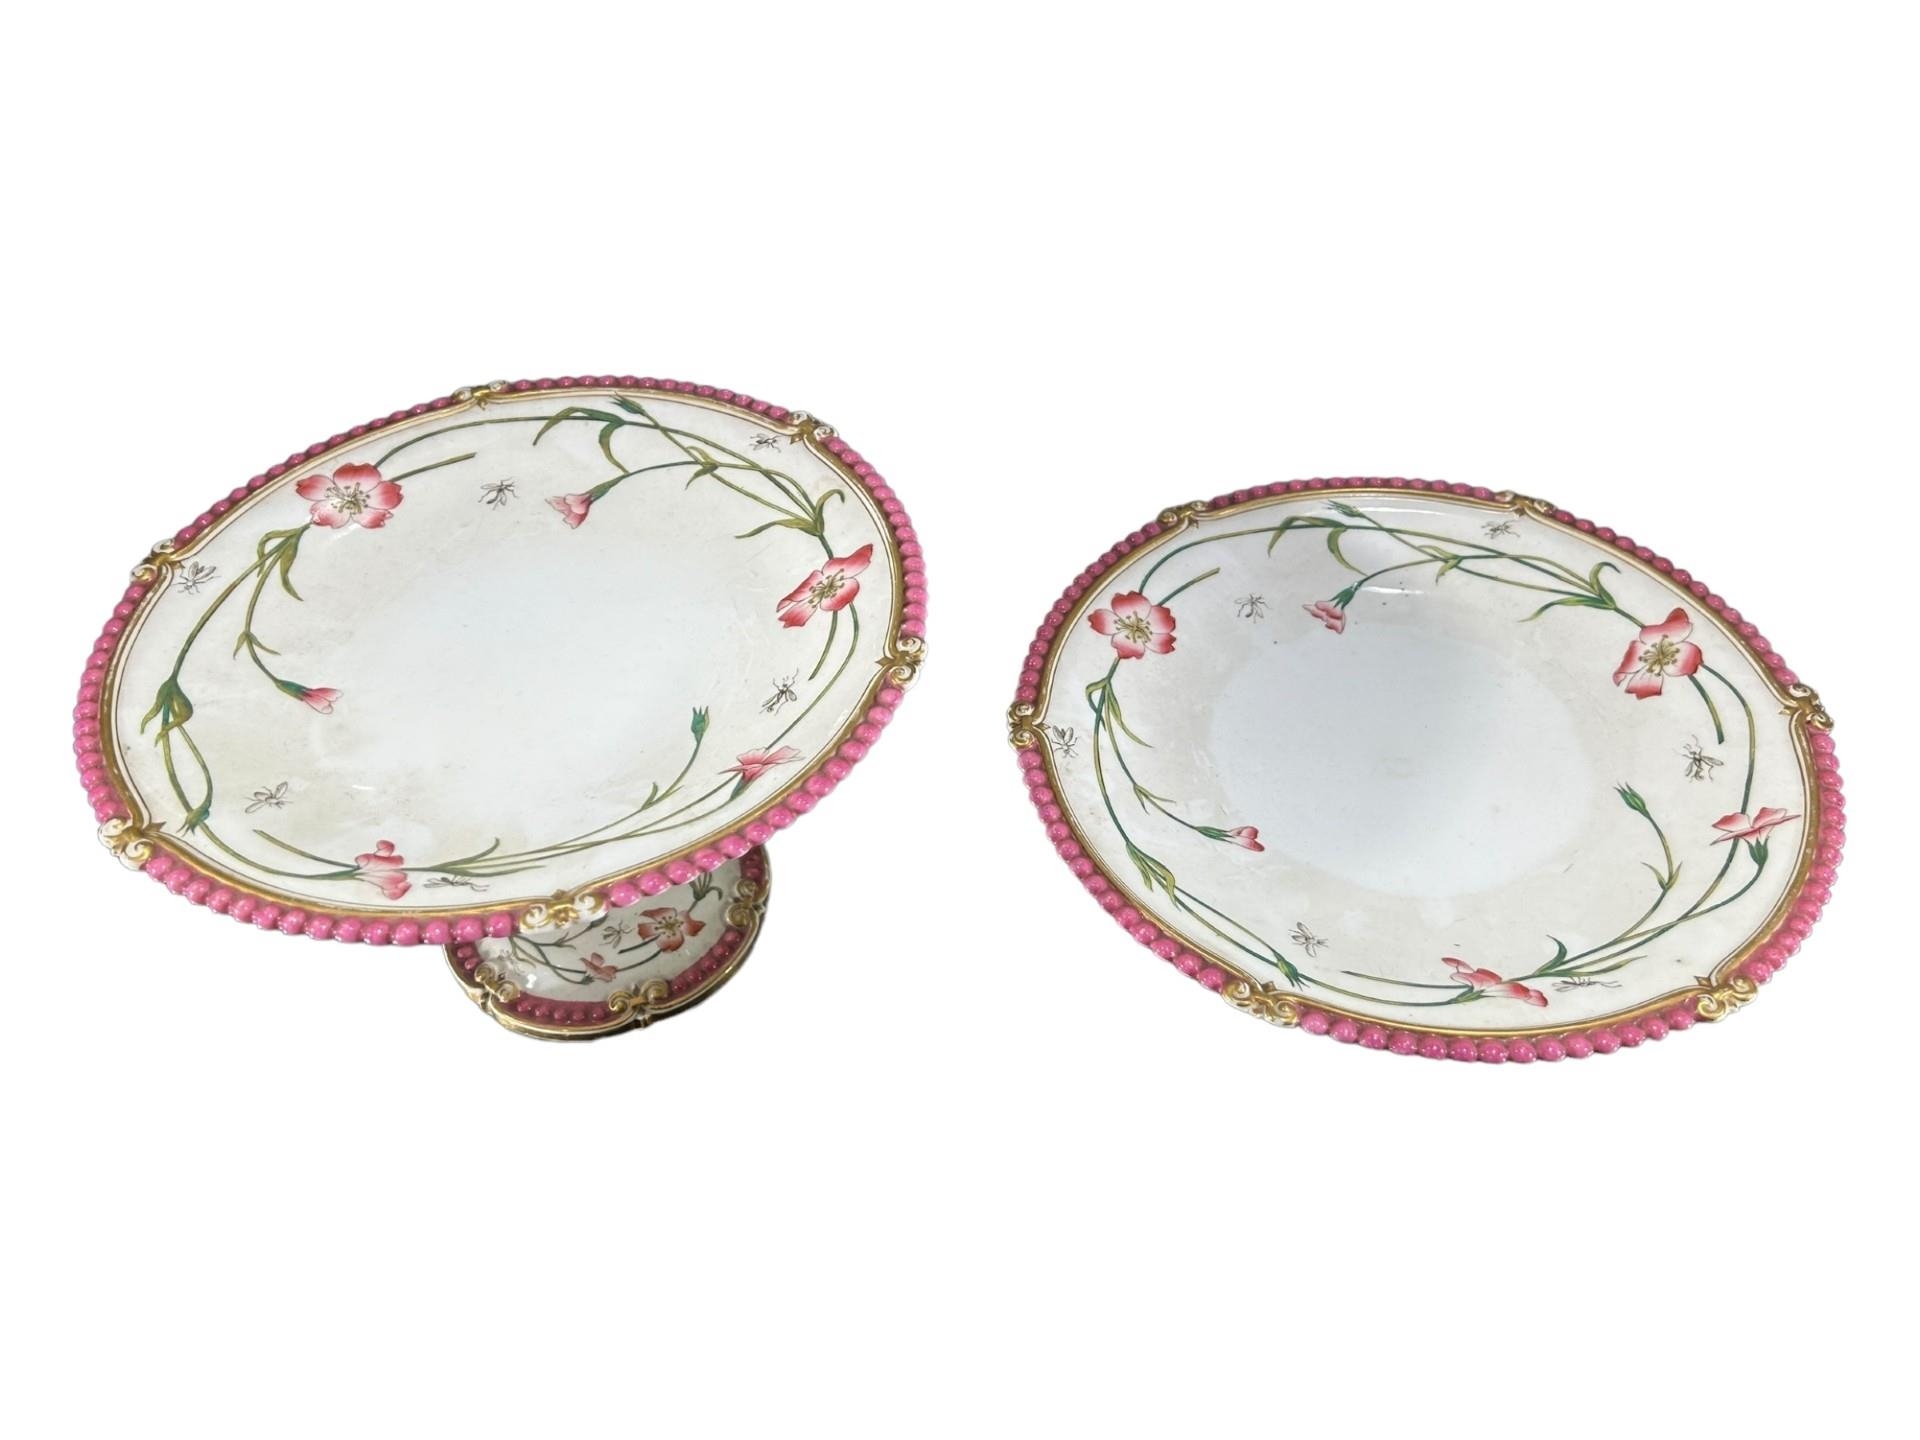 T.C. BROWN-WESTHEAD MOORE & CO., A 19TH CENTURY VICTORIAN PORCELAIN DESSERT TAZZAS AND PLATES - Image 3 of 5